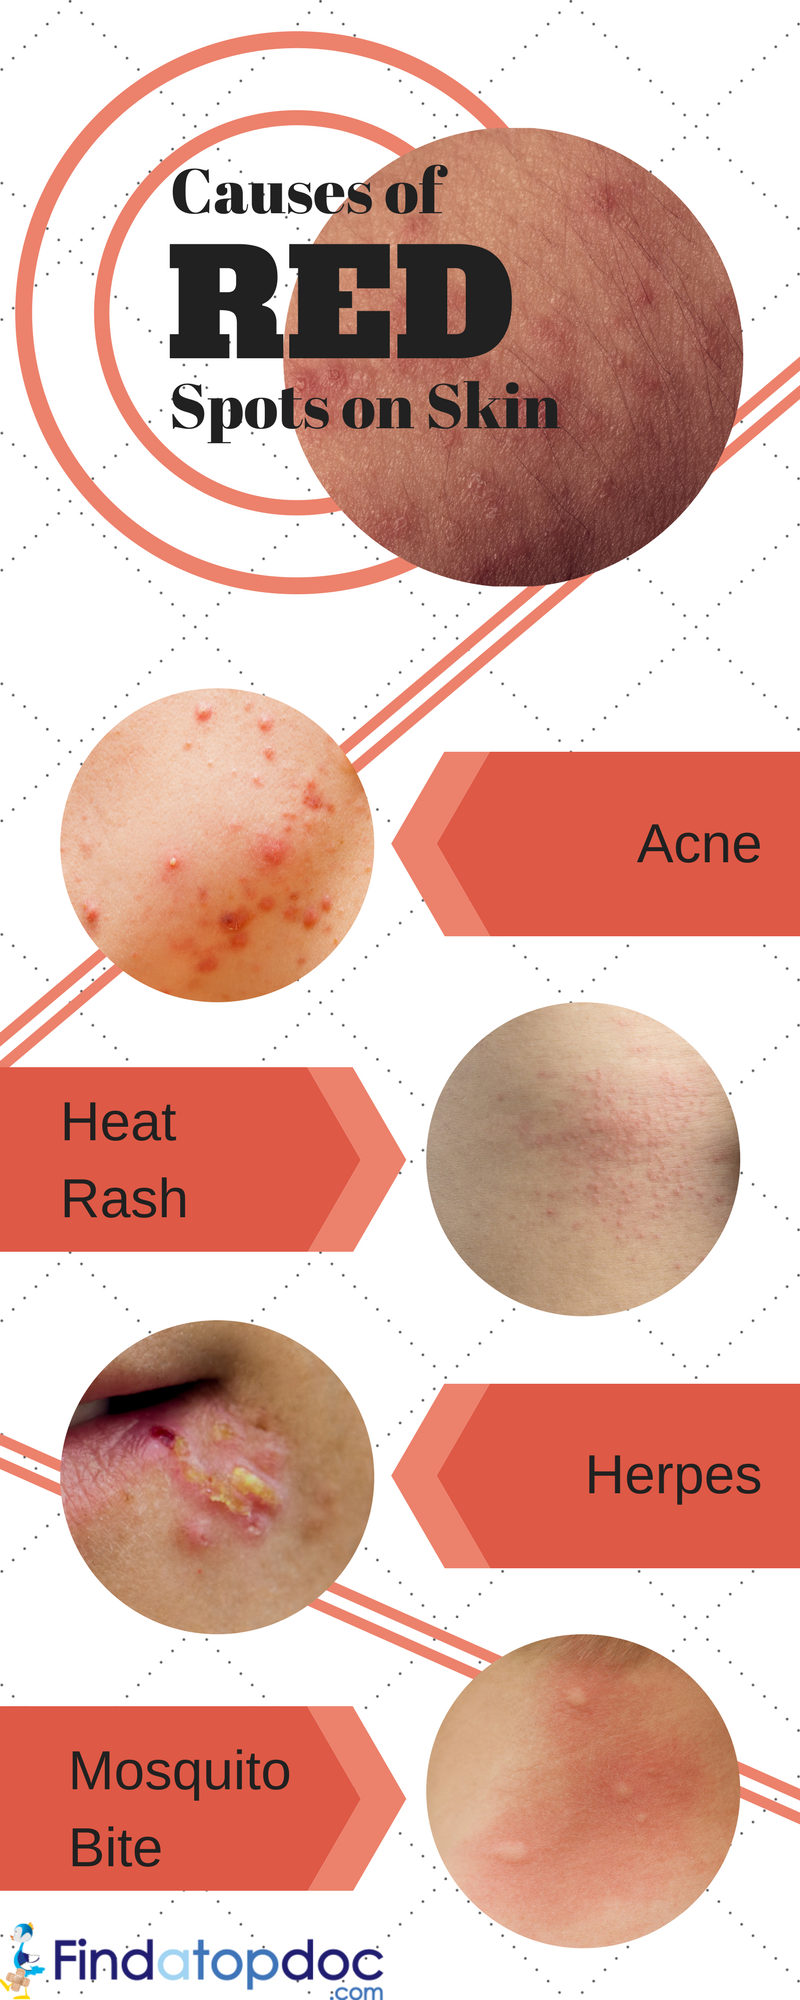 Heat Rash: Signs, Duration, and Treatment